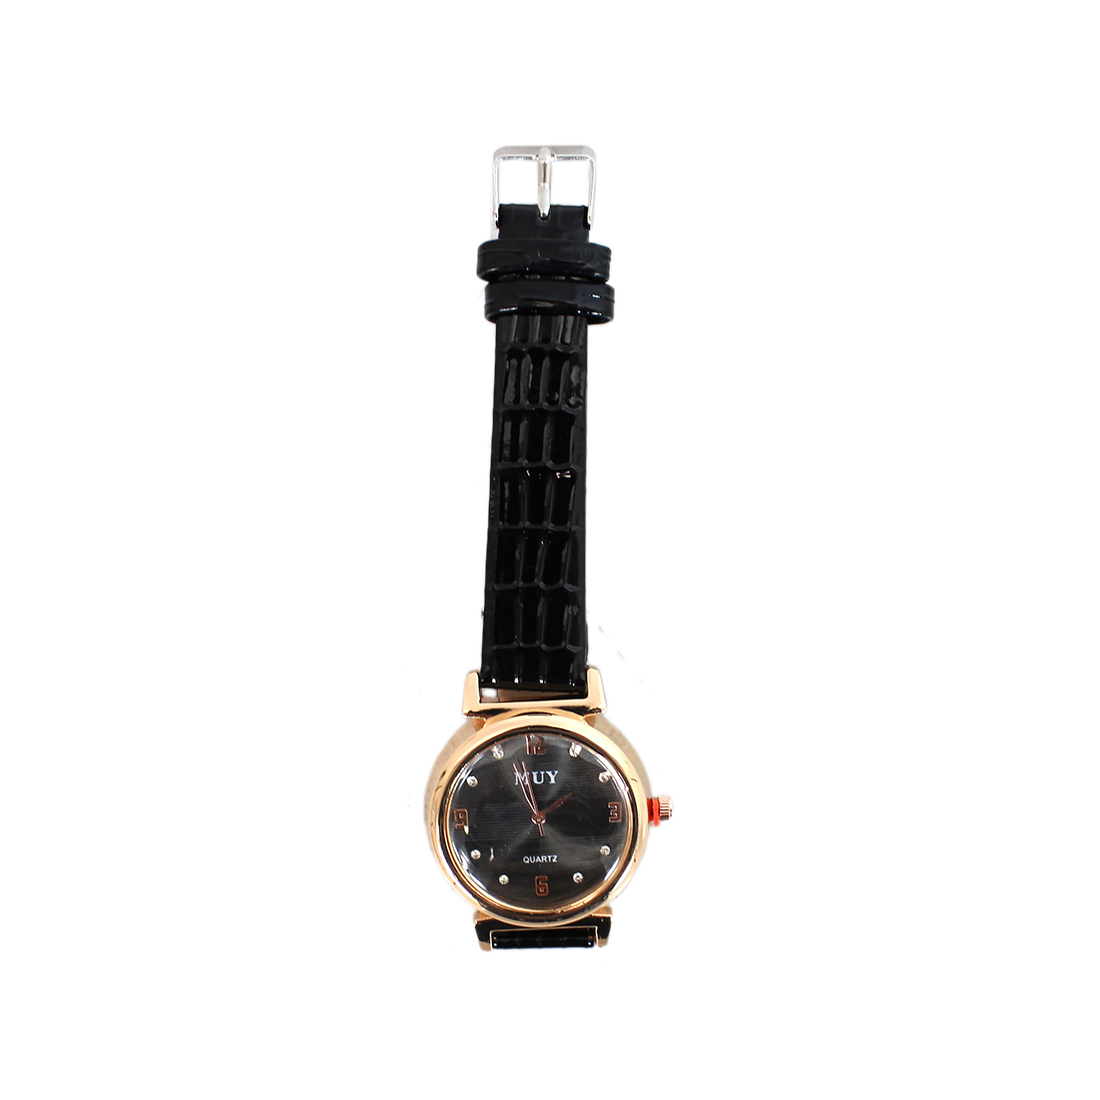 Designed strap with circle shape golden face